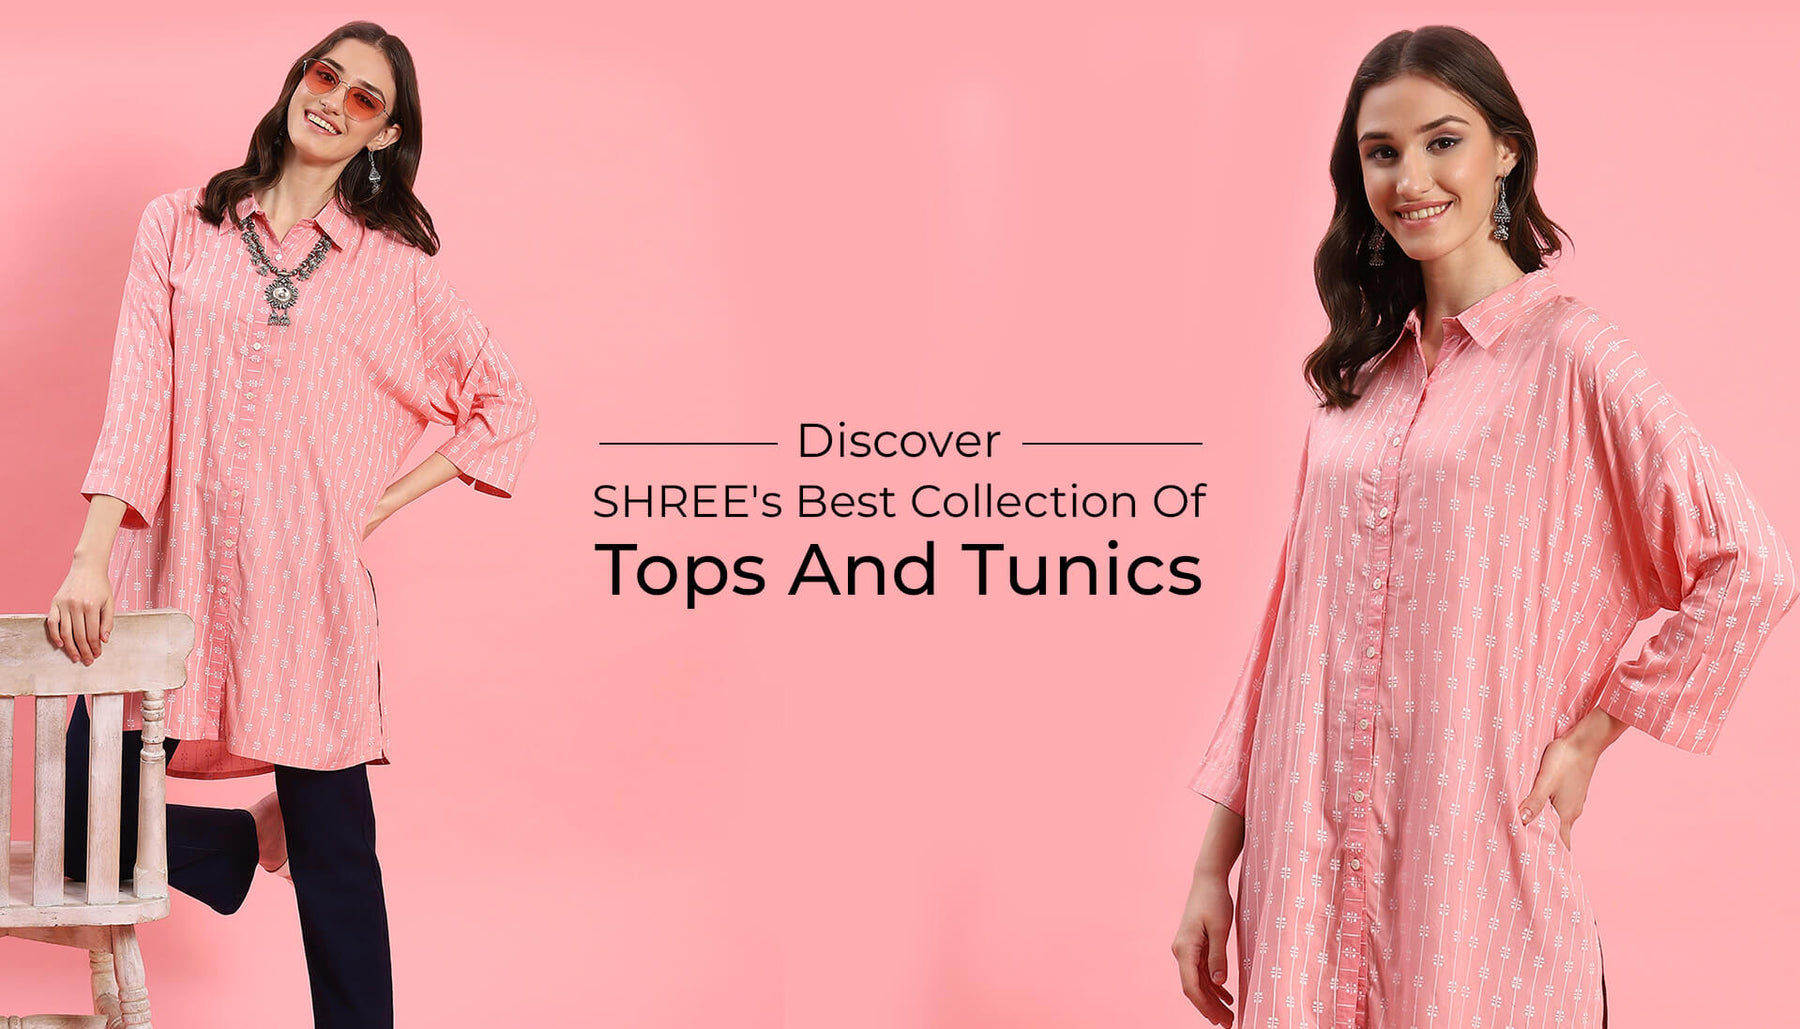 Discover Shree's Best Collection Of Tops And Tunics